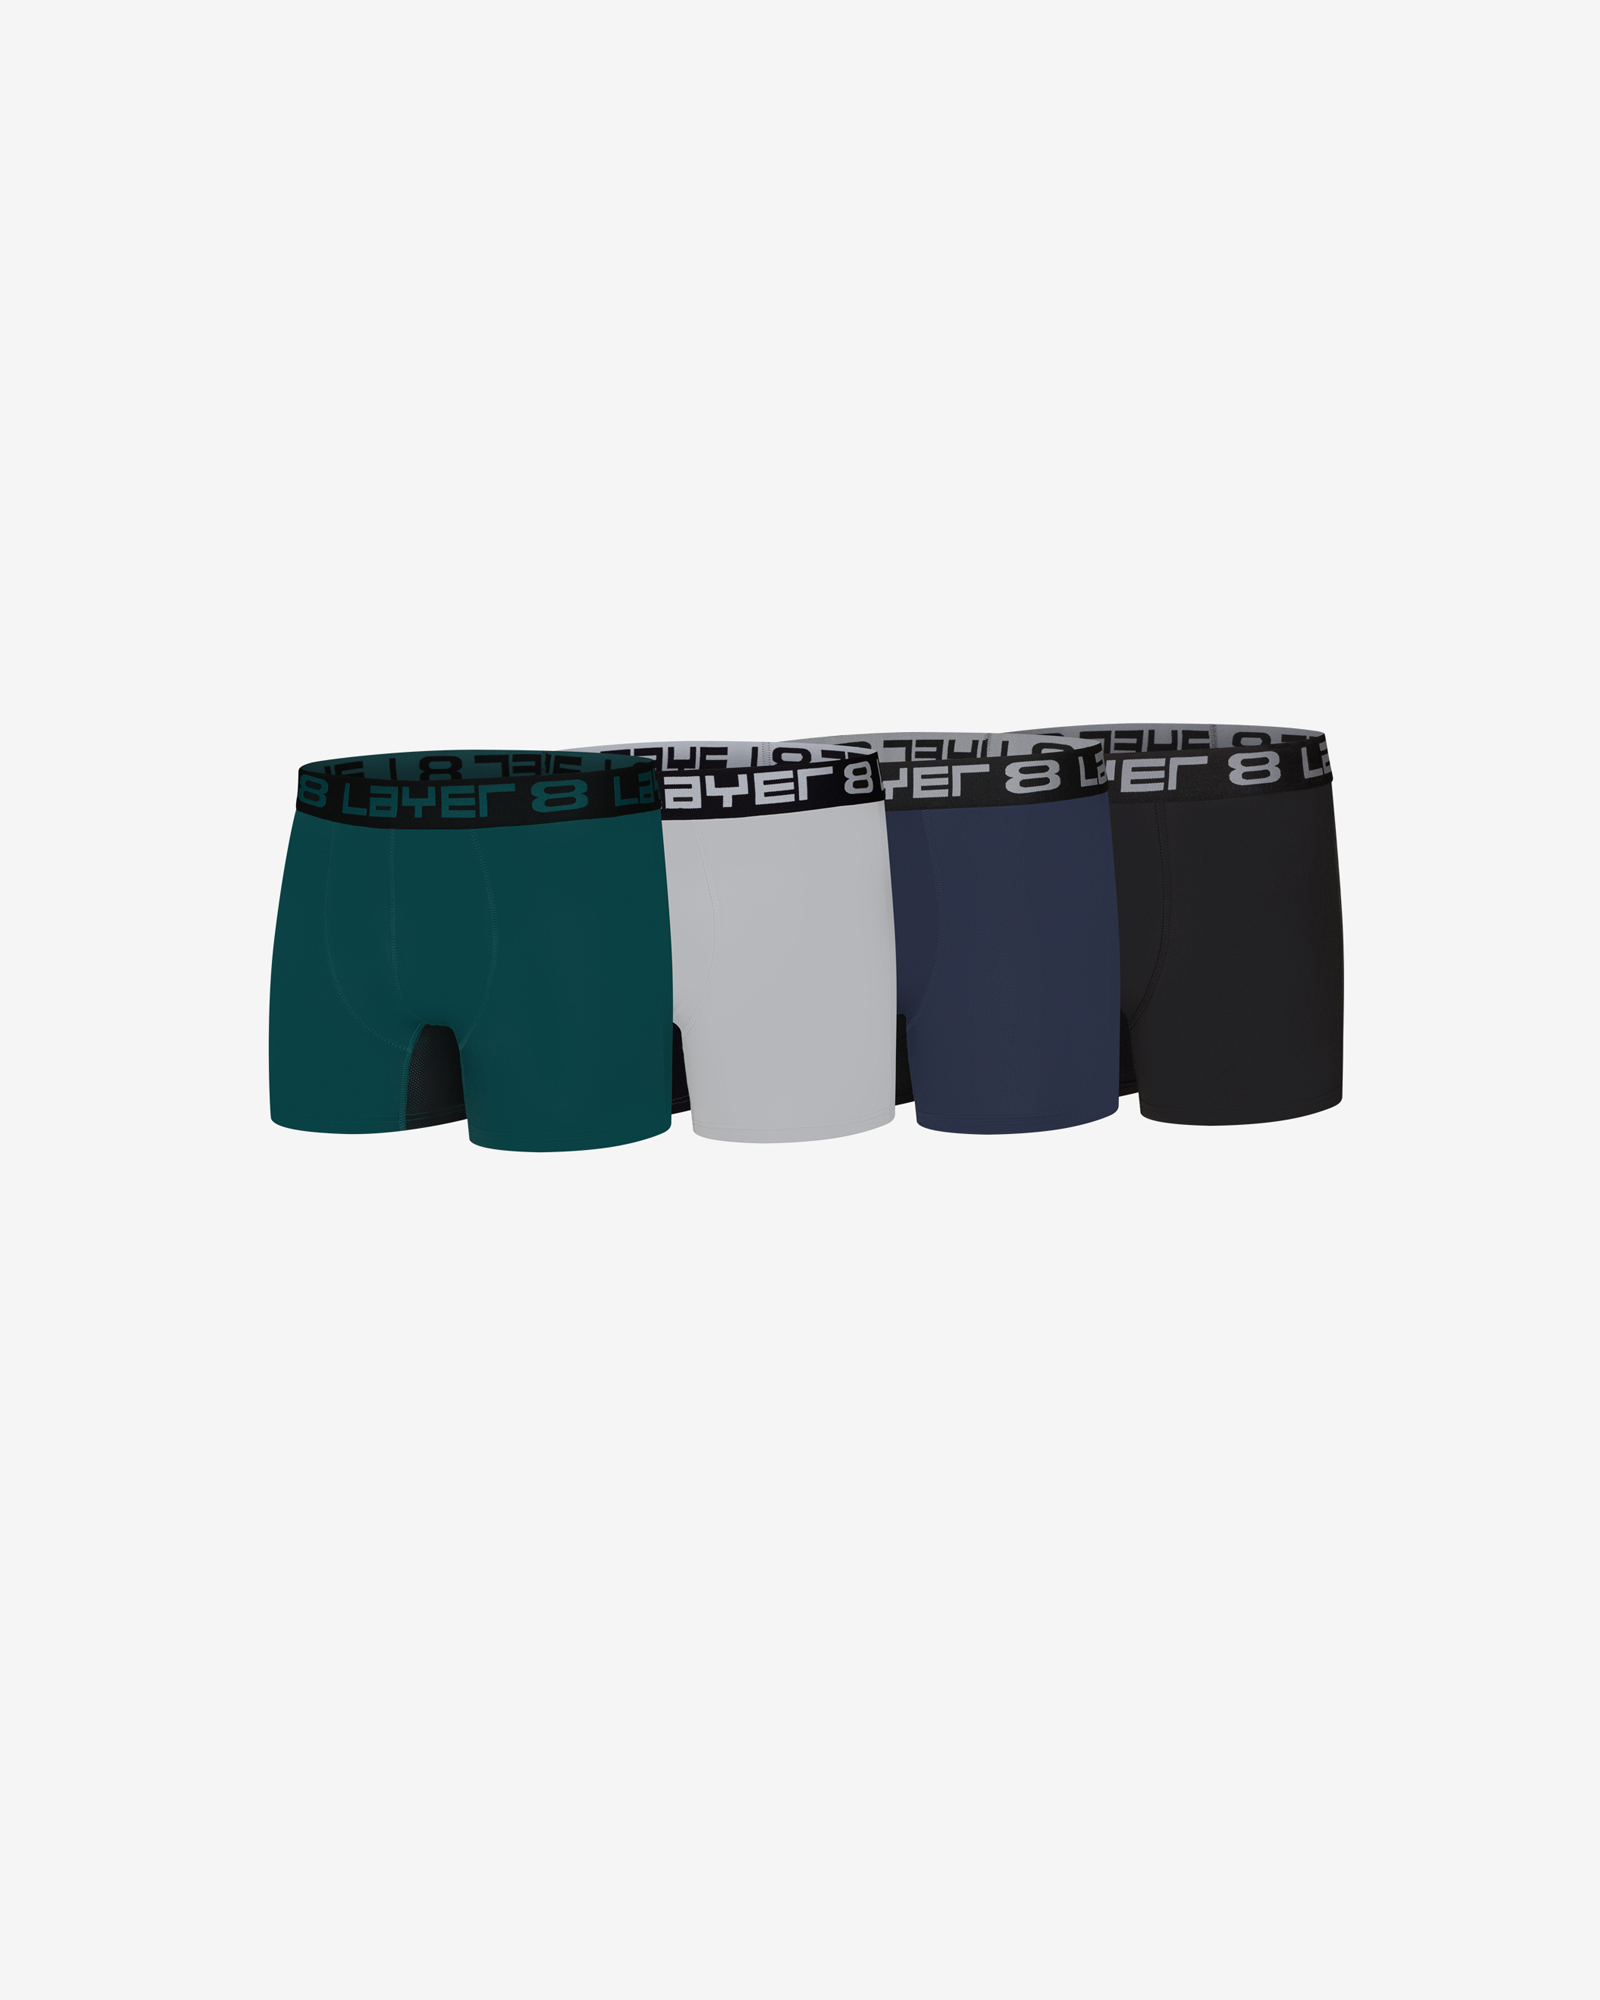 Best Boxer Shorts (30 products) compare price now »